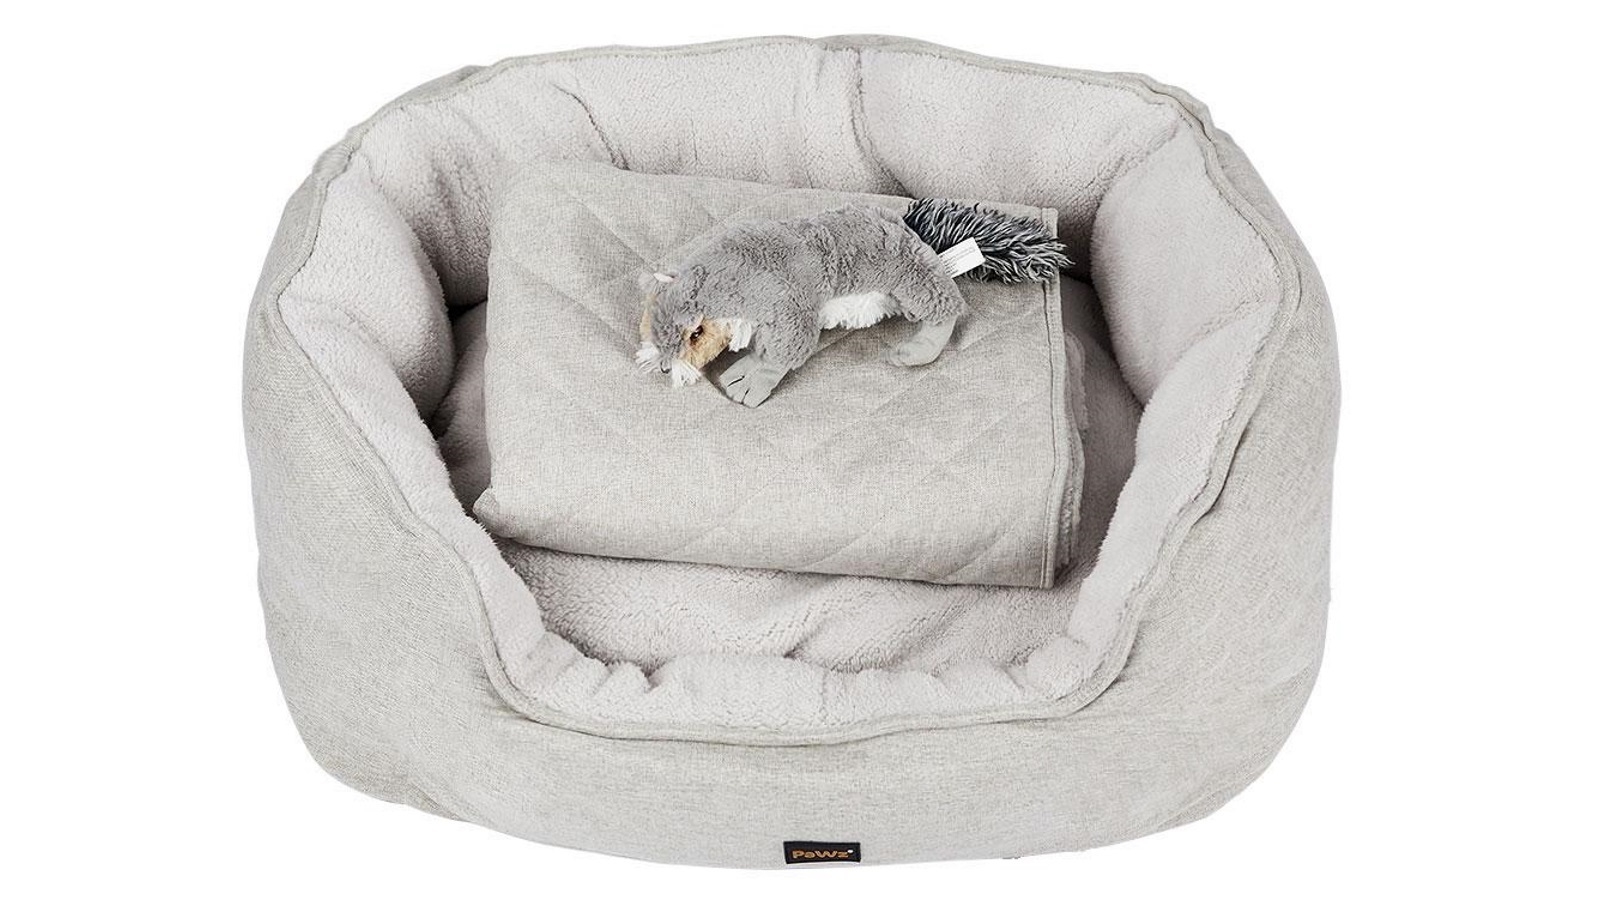 Soft Warm Fleece Dog Cuddler Bed Bolster Lounge with Non Slip Water Resistant Base Urijk Soft Washable Dog Cat Bed Waterproof Oxford Dog Basket Bed for Puppy Small Medium Large Dog Cat 